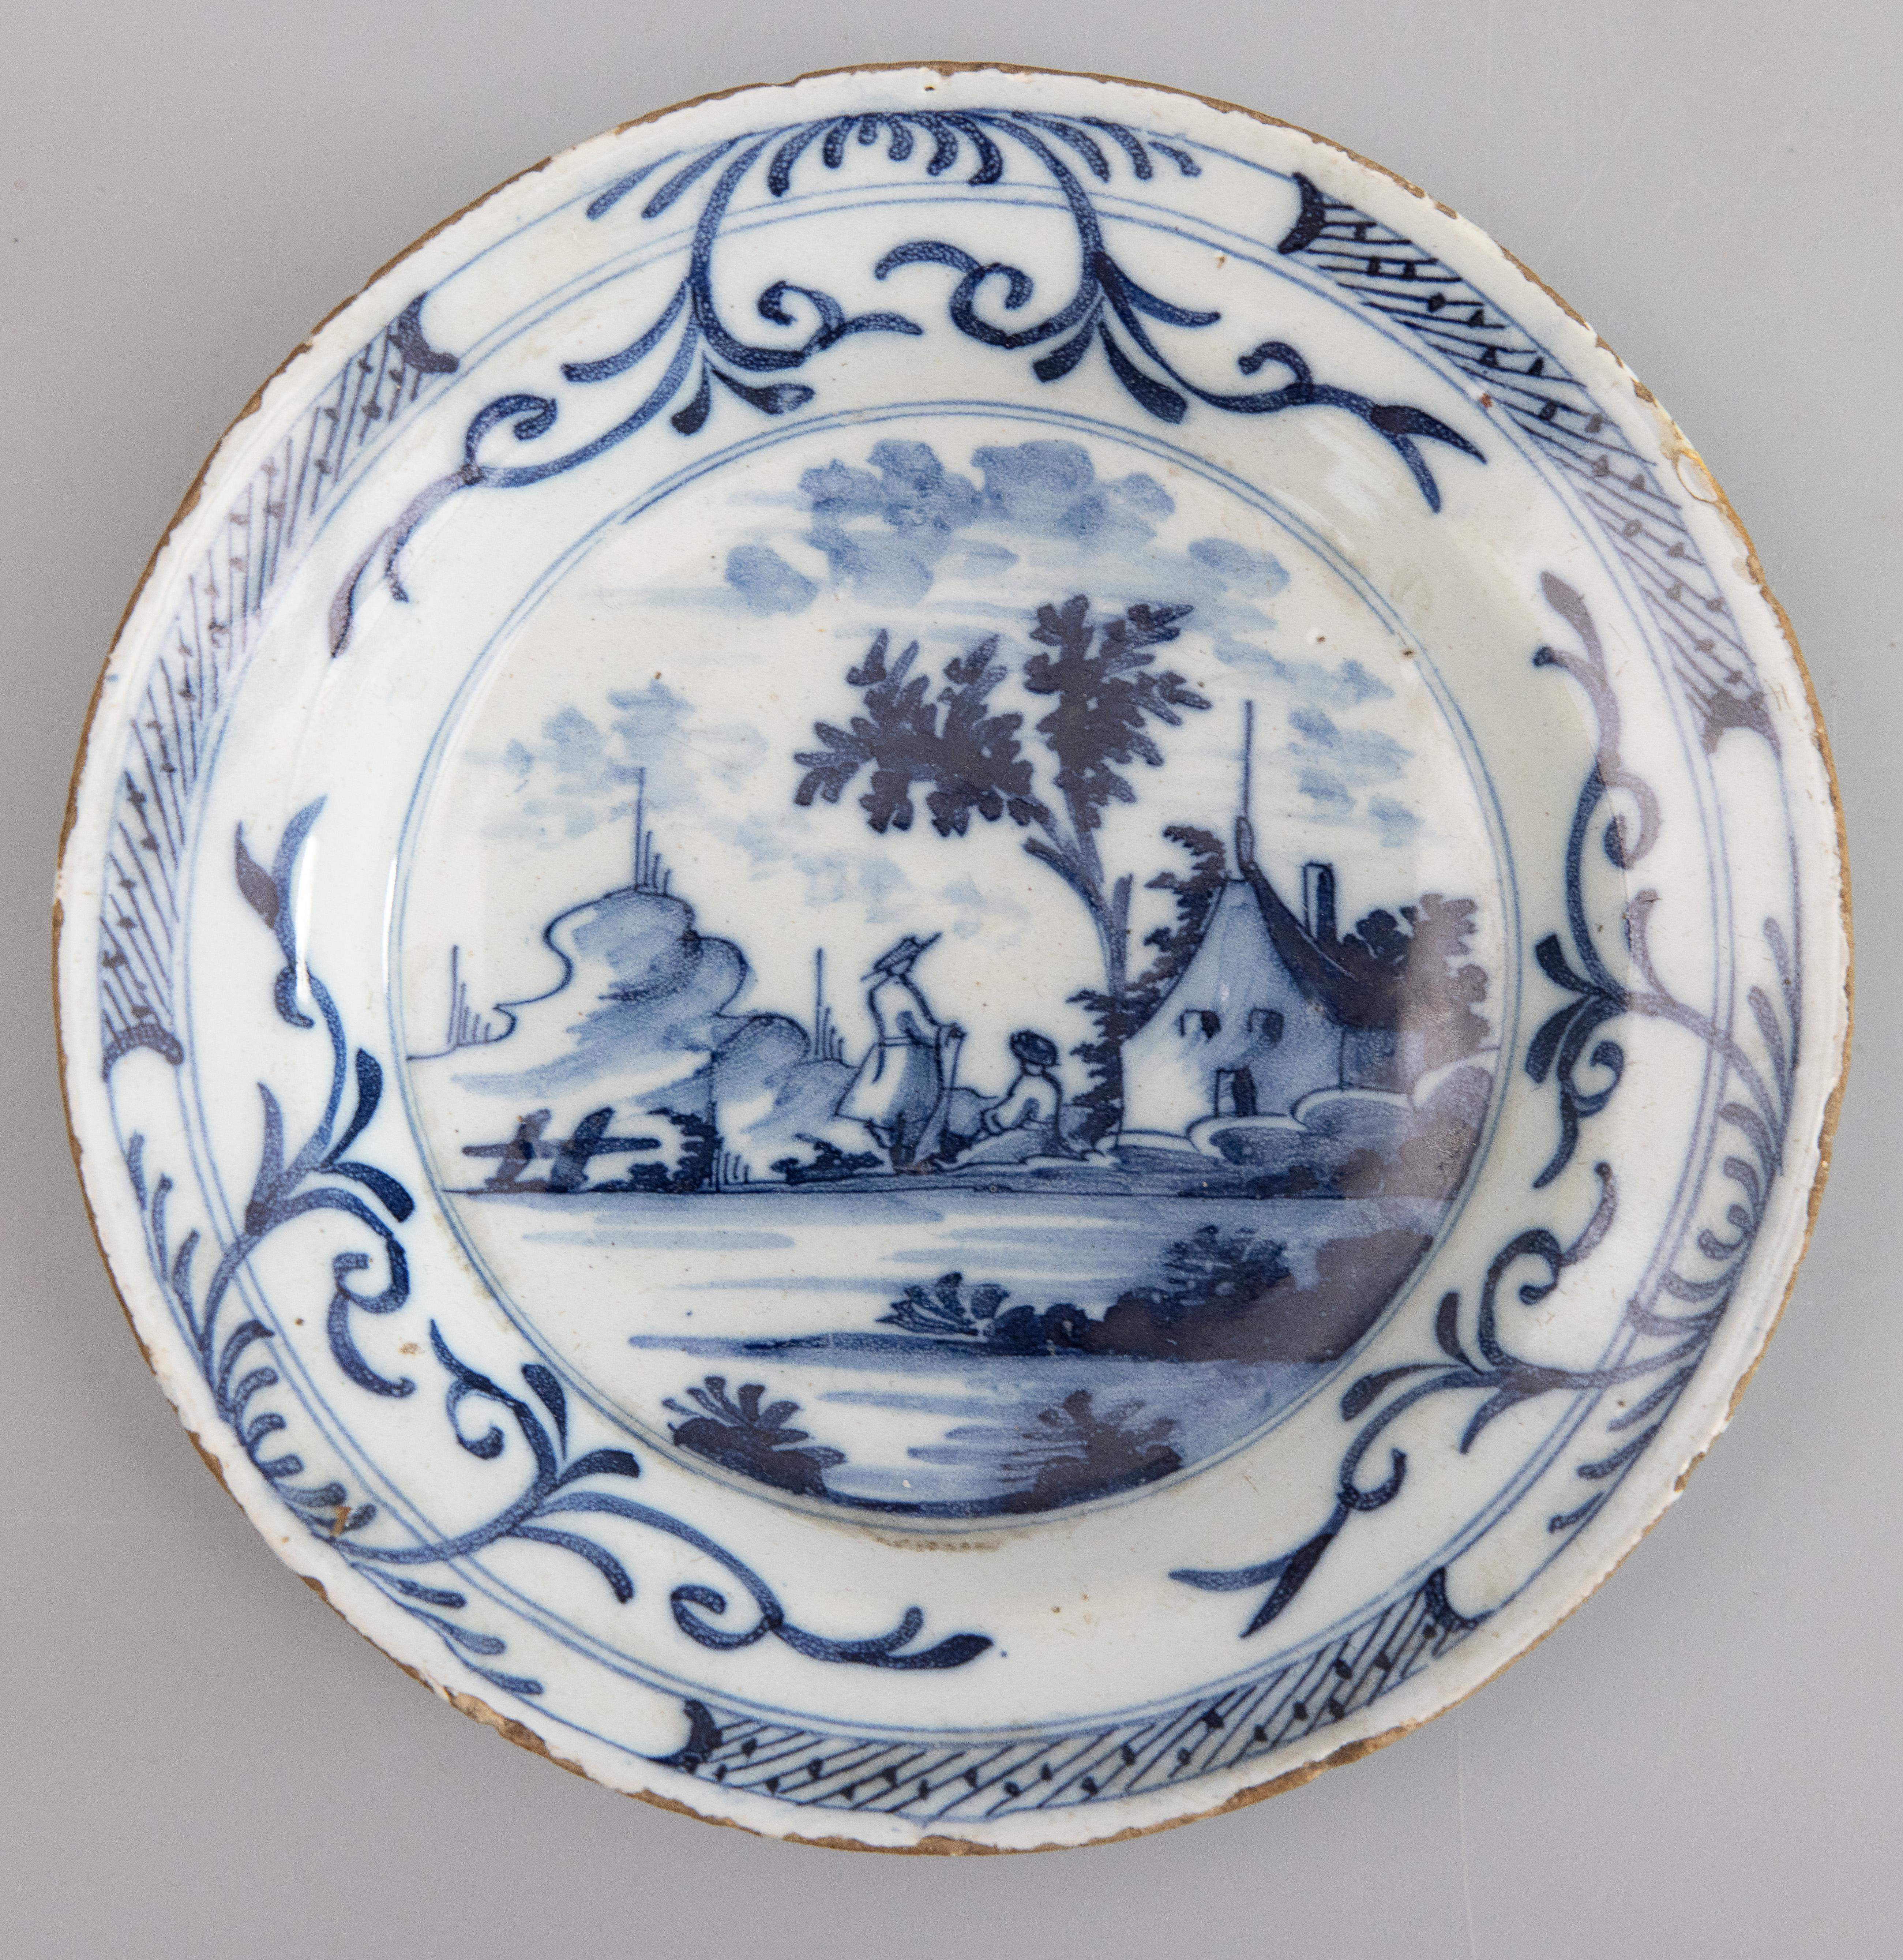 A rare pair of diminutive 18th-Century Dutch Delft faience Chinoiserie style plates with hand painted lovely cobalt blue and white figures in a landscape scene. One plate is pierced, as this was an old way of hanging plates. They would look fabulous